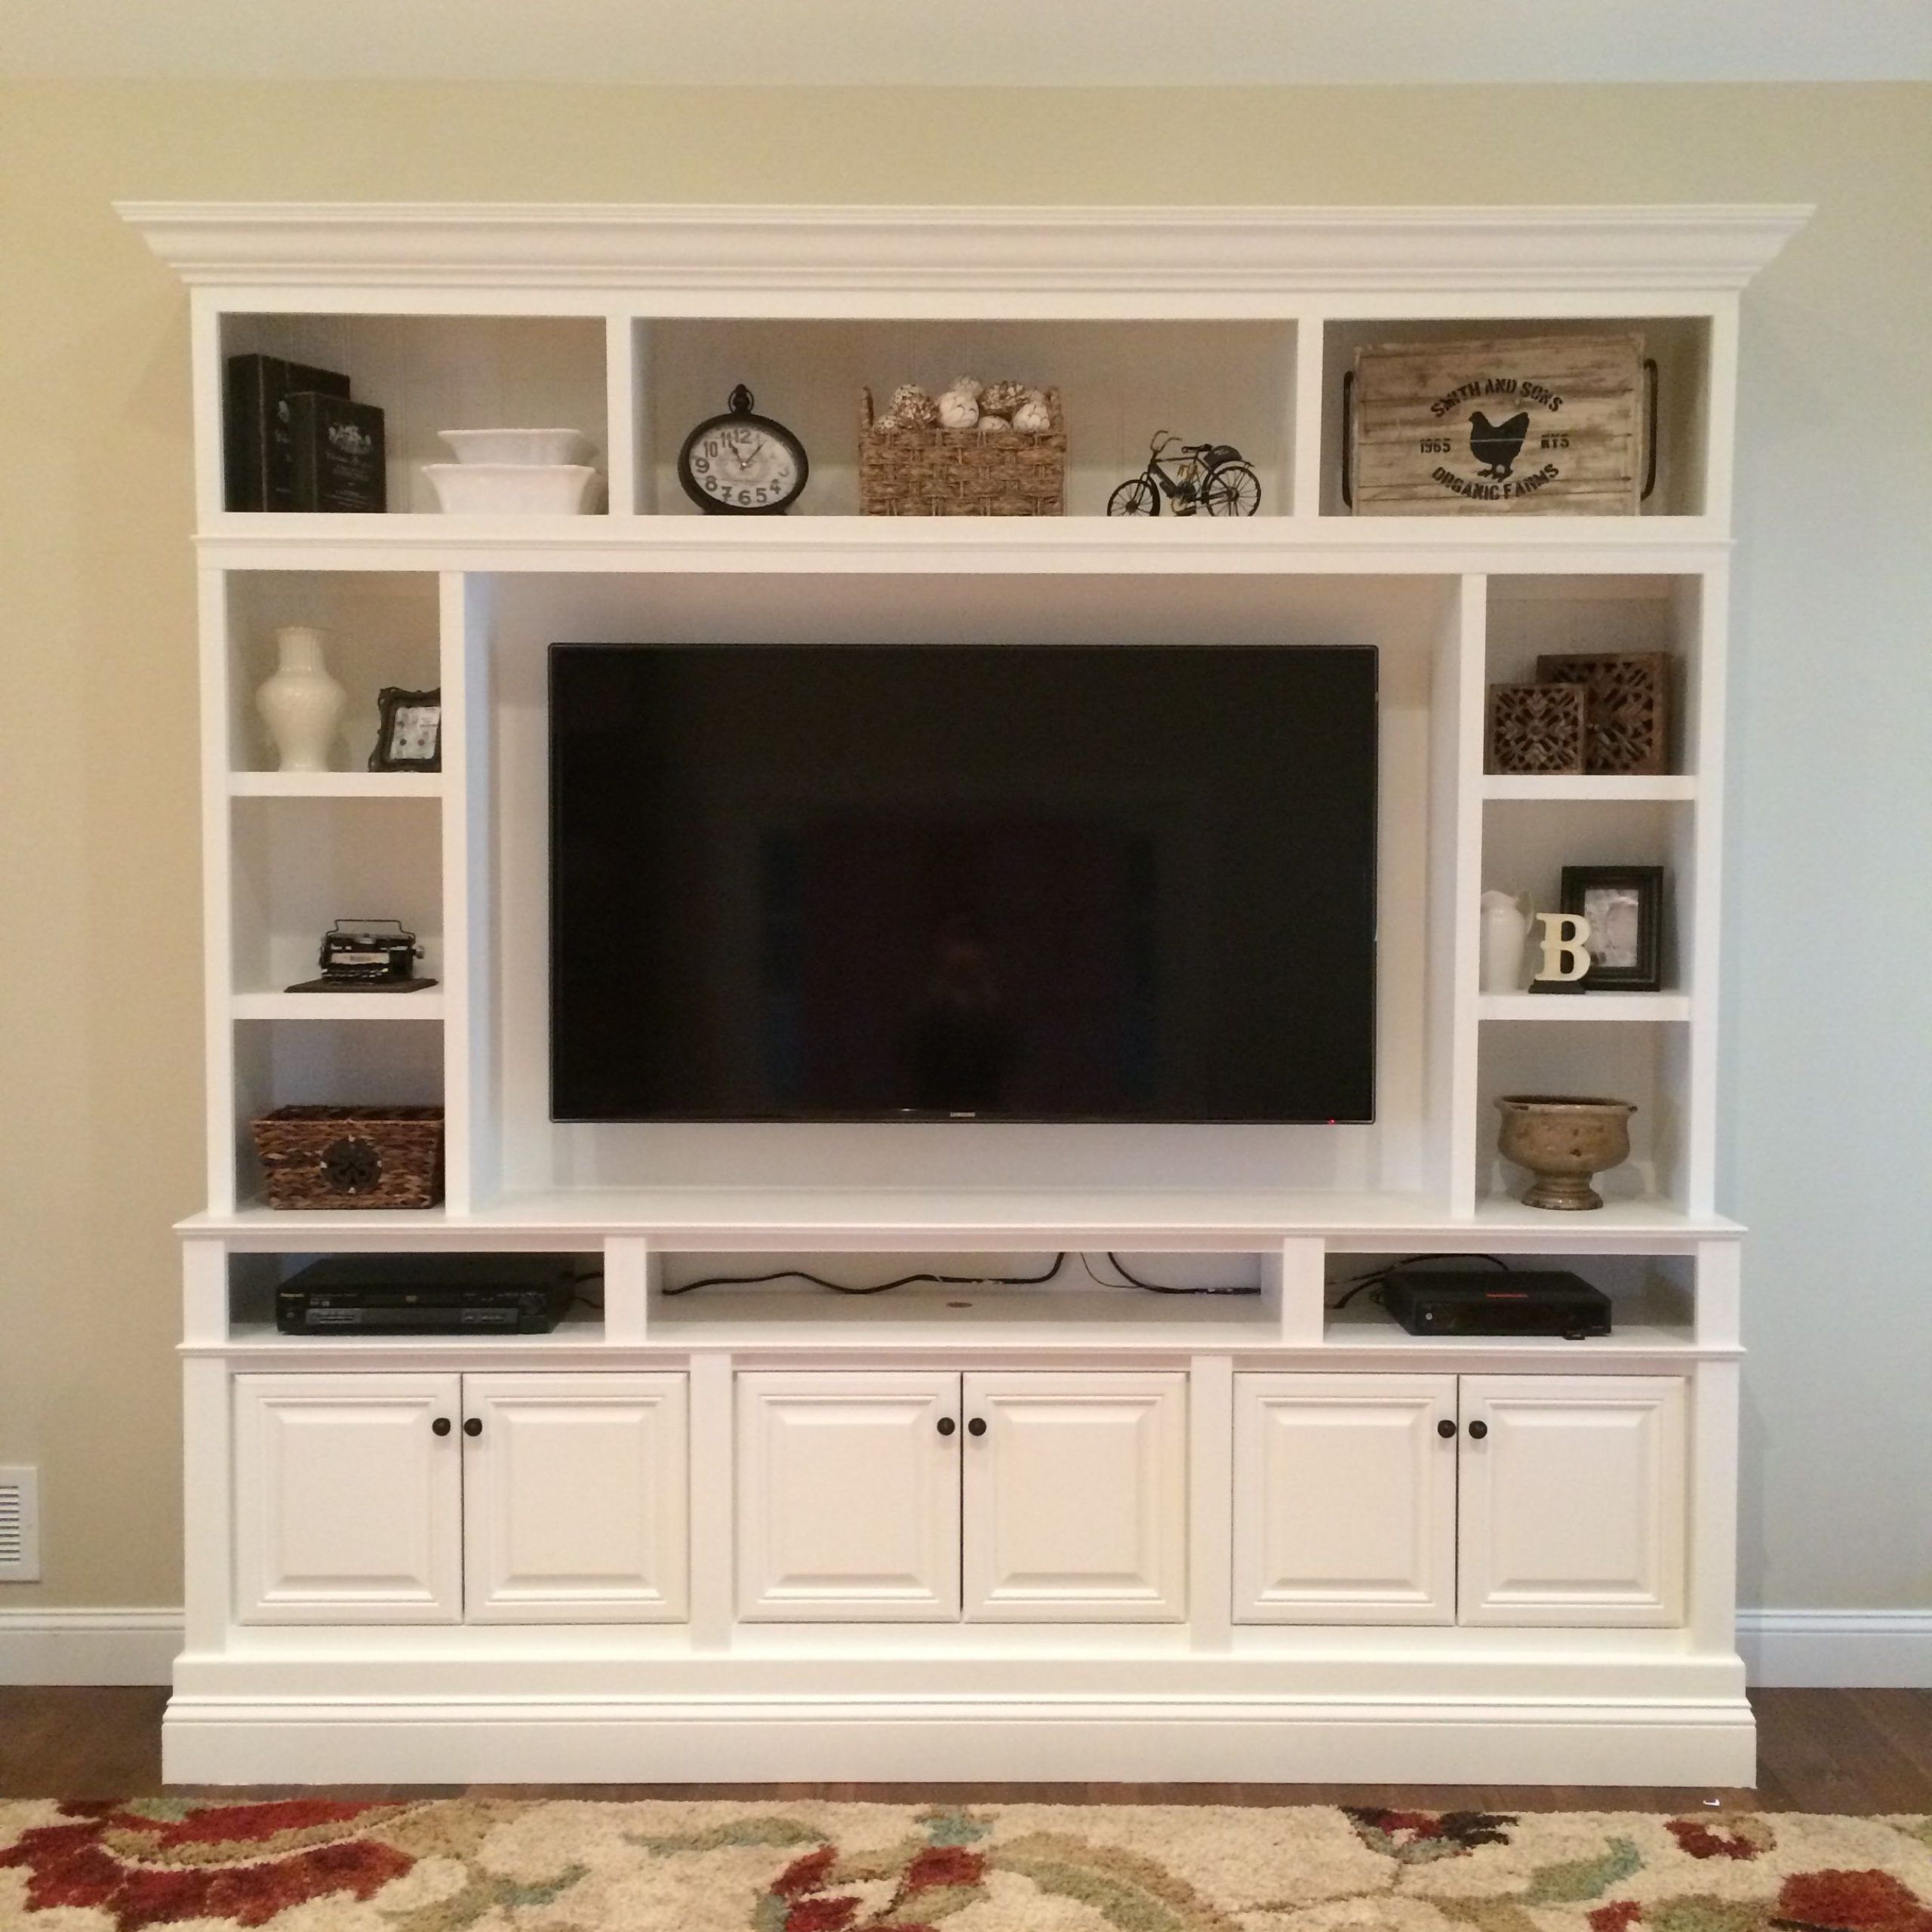 Diy Built In Tv Cabinet – Axis Decoration Ideas Inside Entertainment Center With Storage Cabinet (Gallery 17 of 20)